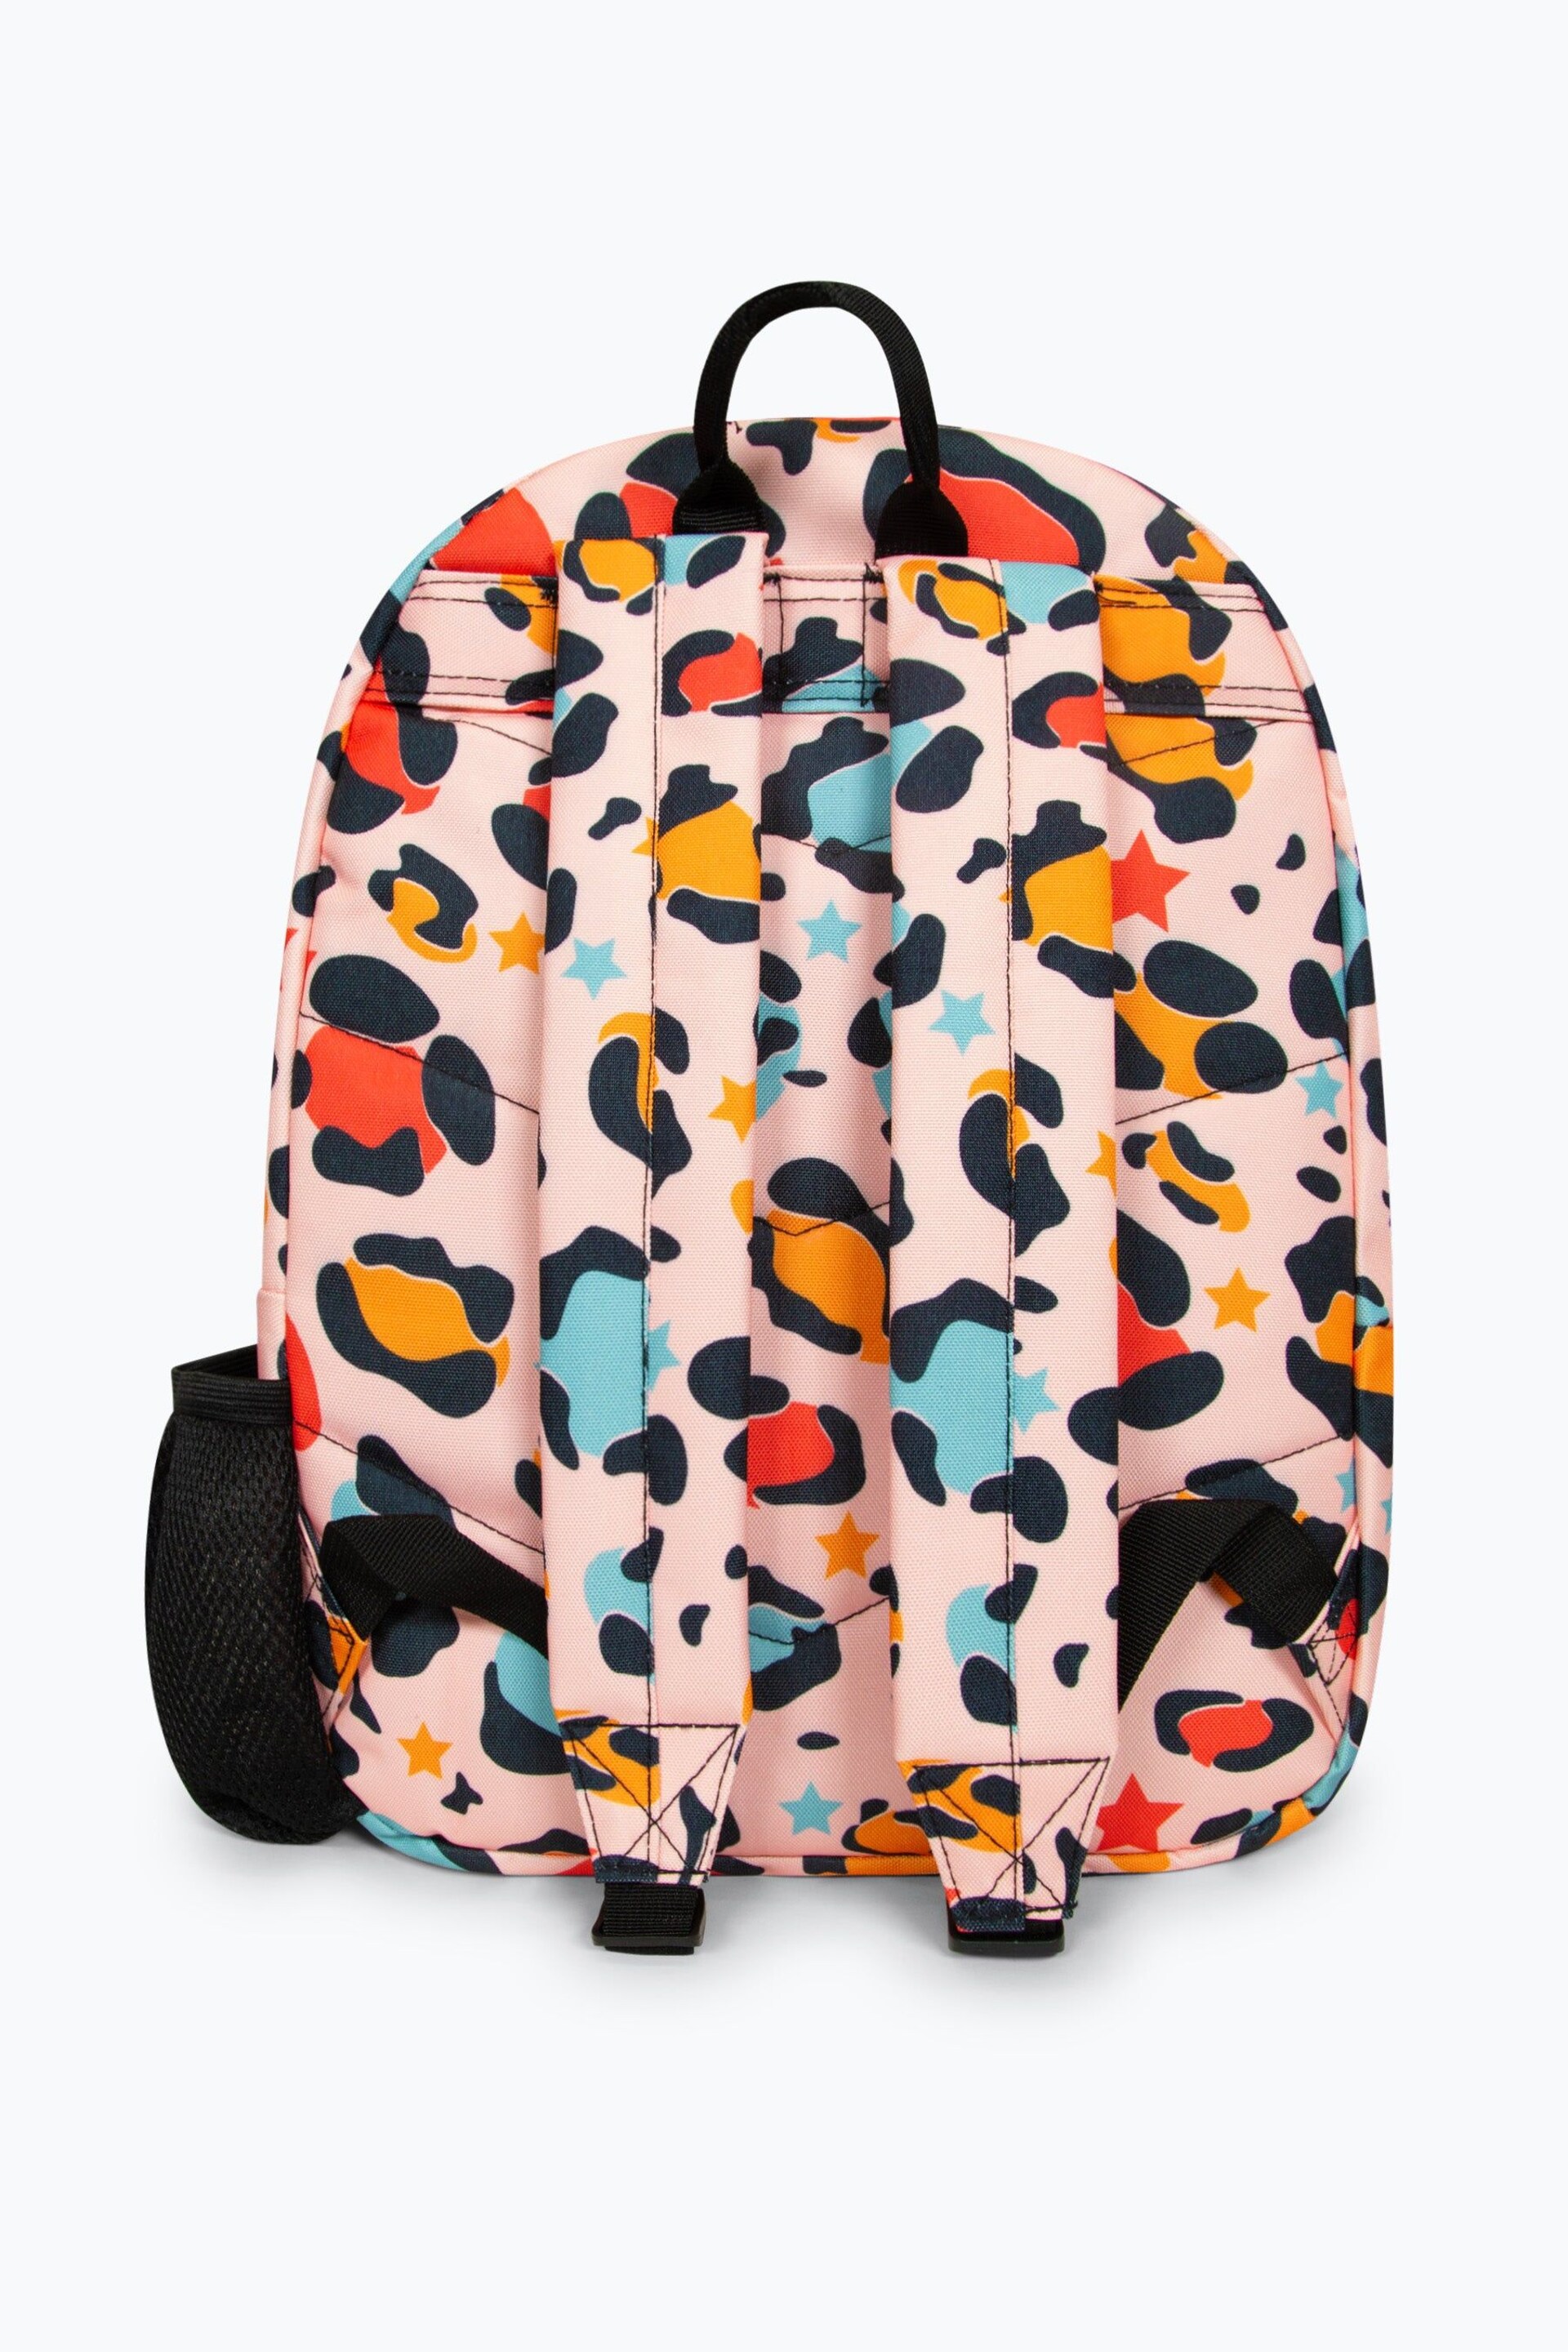 Hype. Peach Star Leopard Badge Backpack - Image 4 of 8